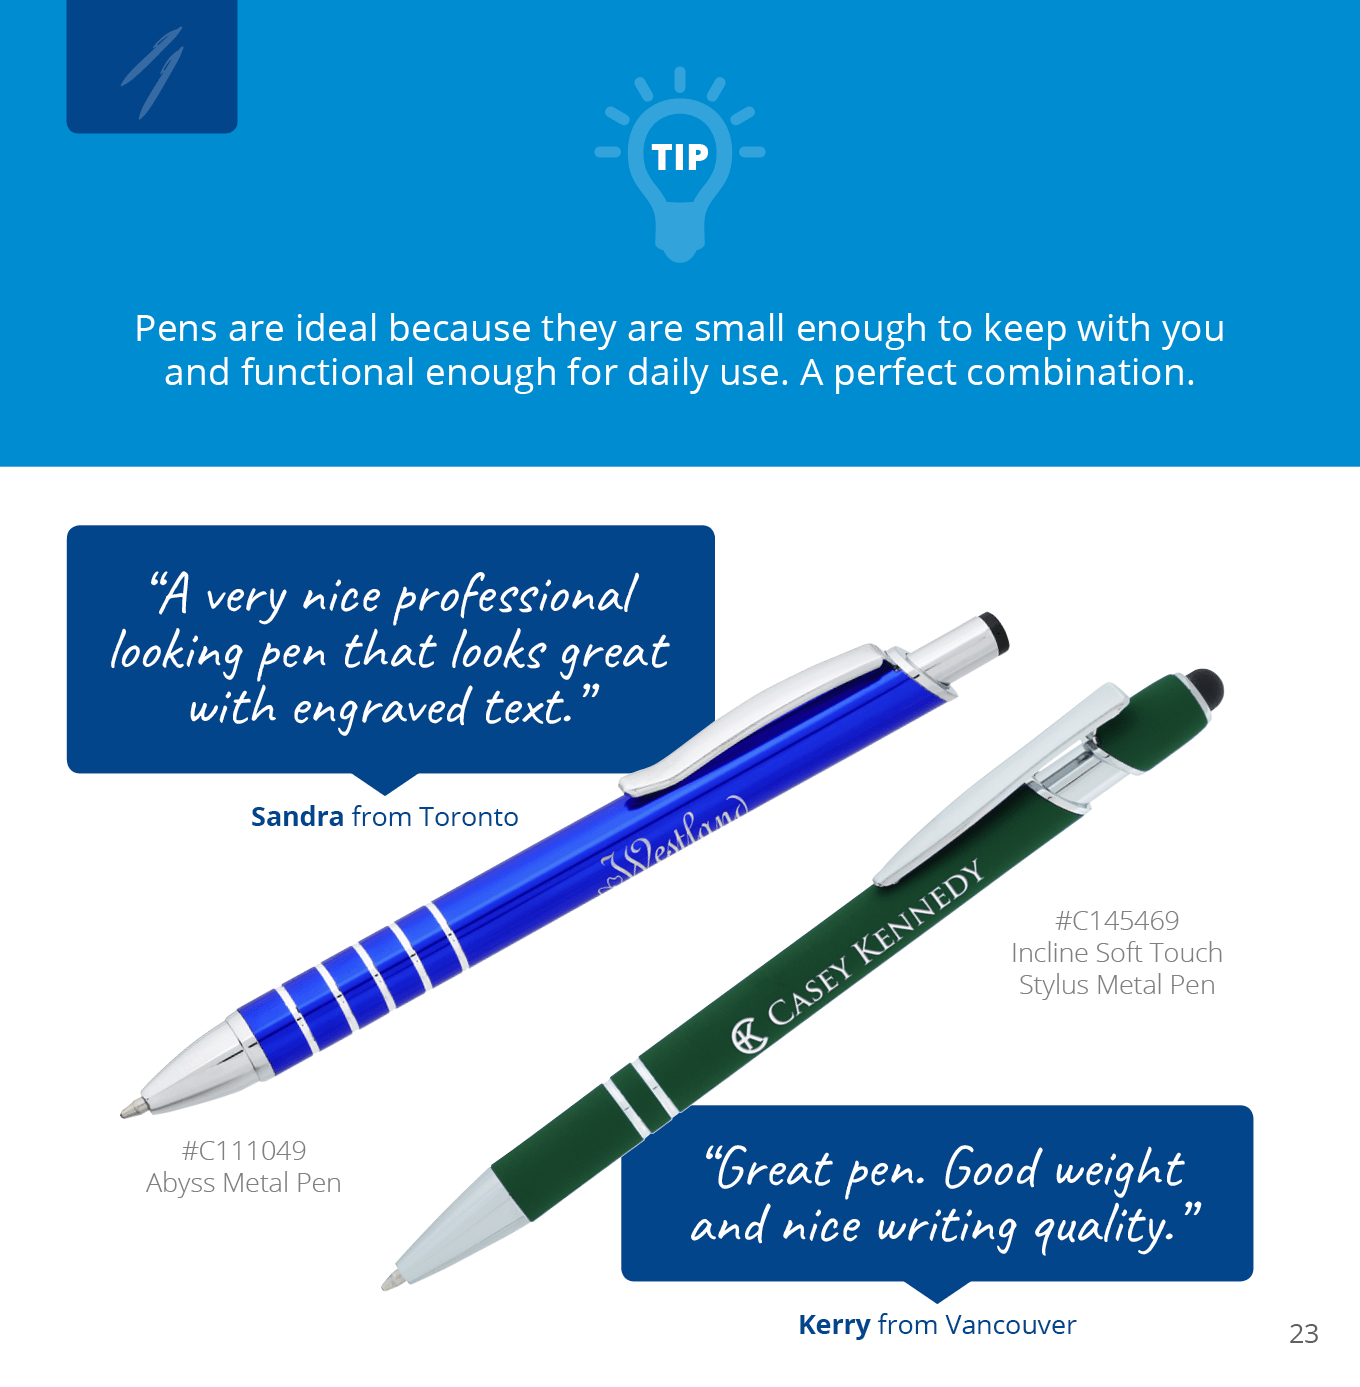 Pens from 4imprint